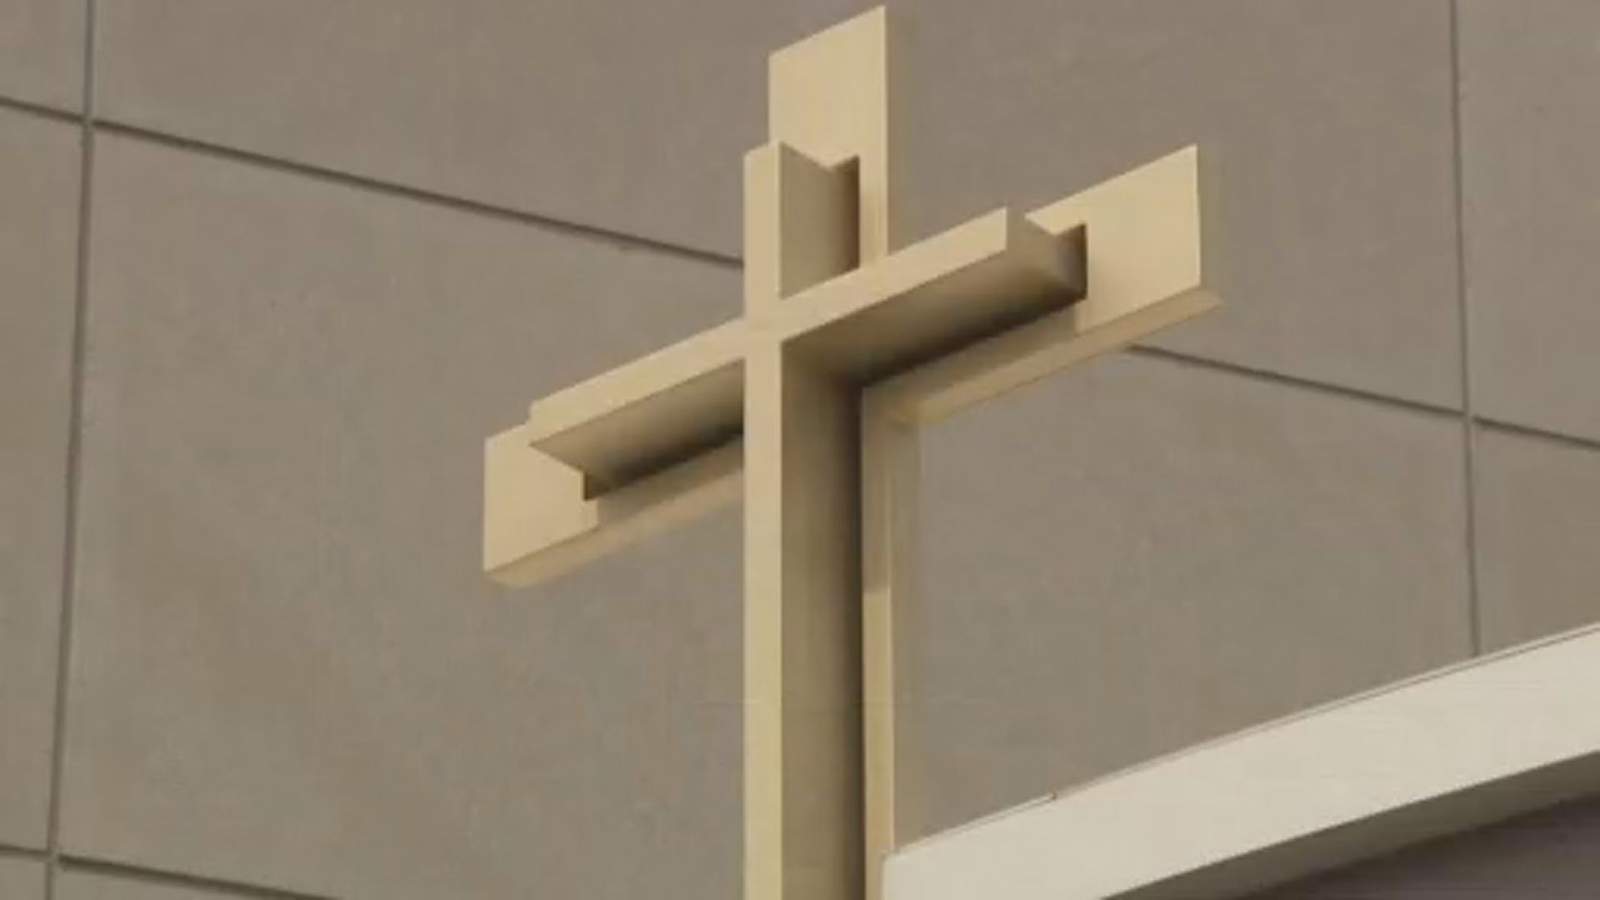 Churches prepare to hold Easter Sunday services in very nontraditional ways